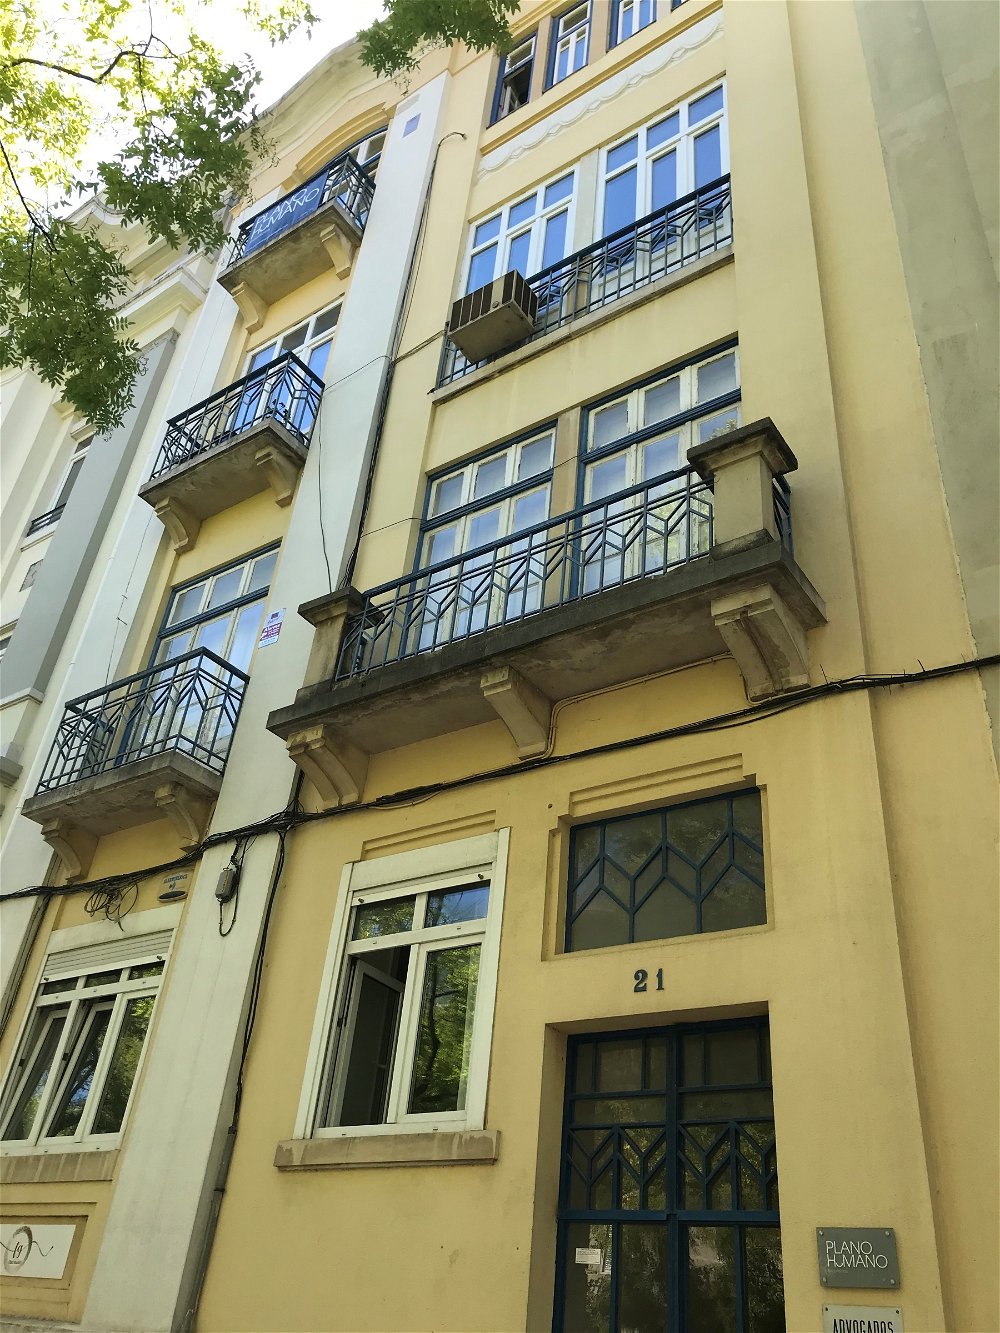 Building for investment, in Bairro Azul, in Lisbon 3385636620